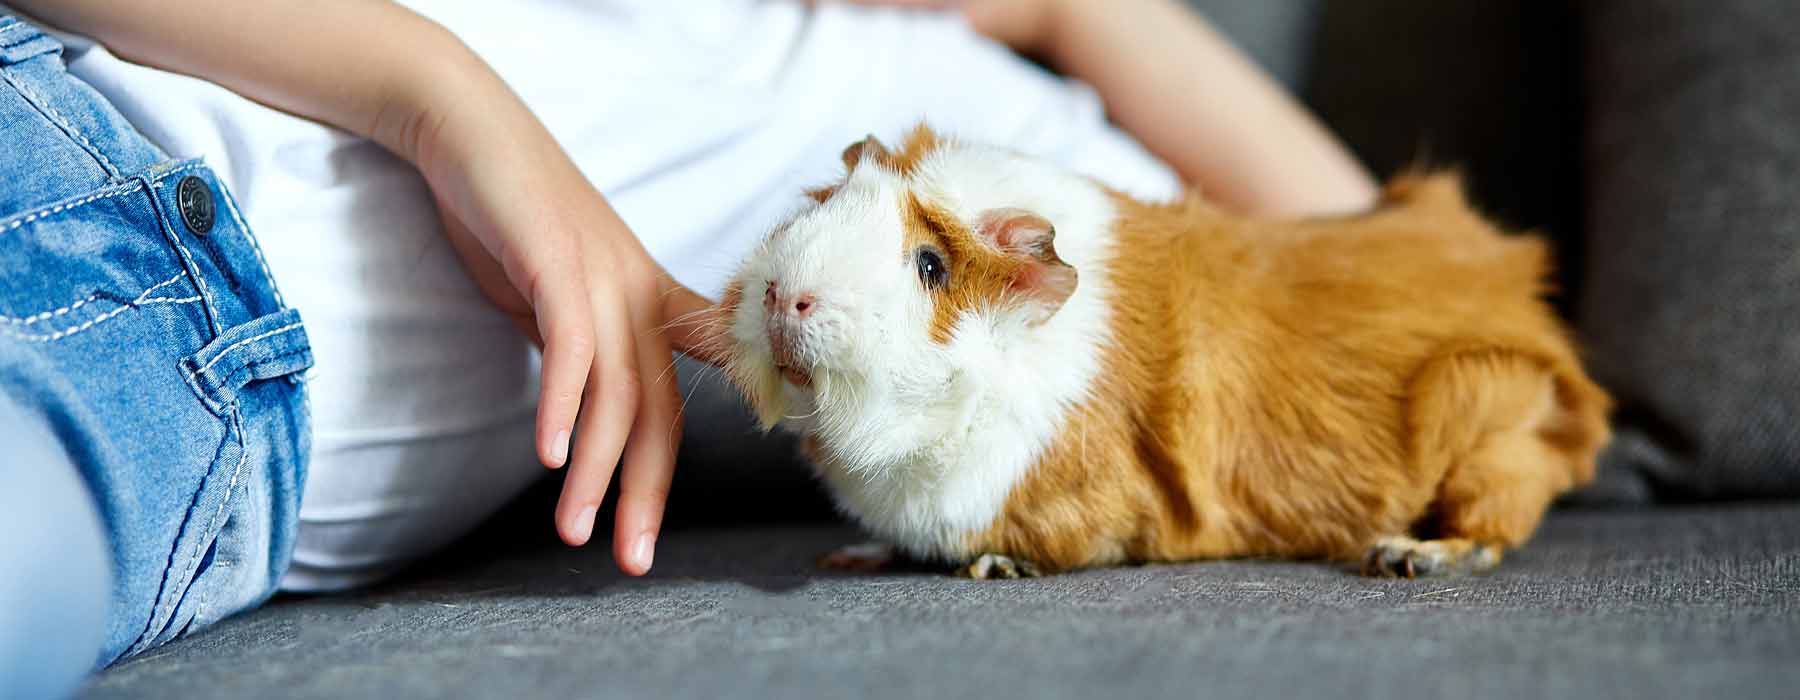 child laying on the floor with a ginger and white abyssinian guinea pig